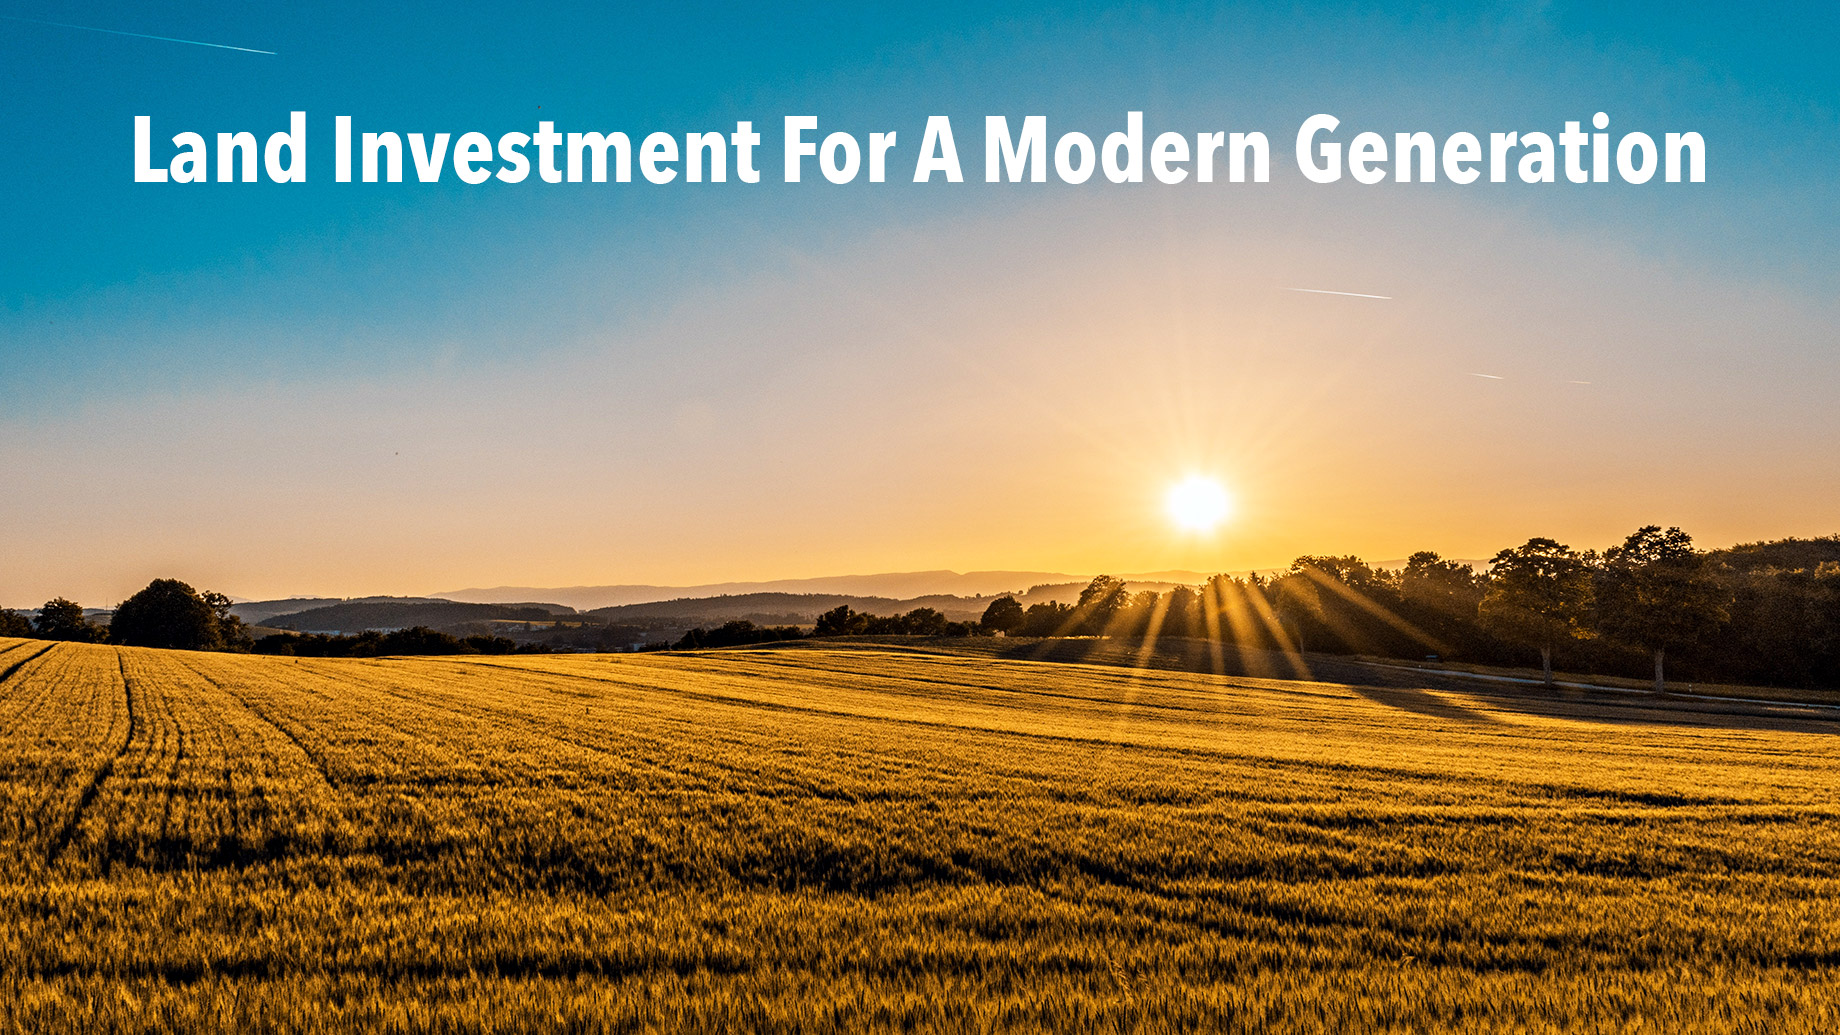 Land Investment For A Modern Generation